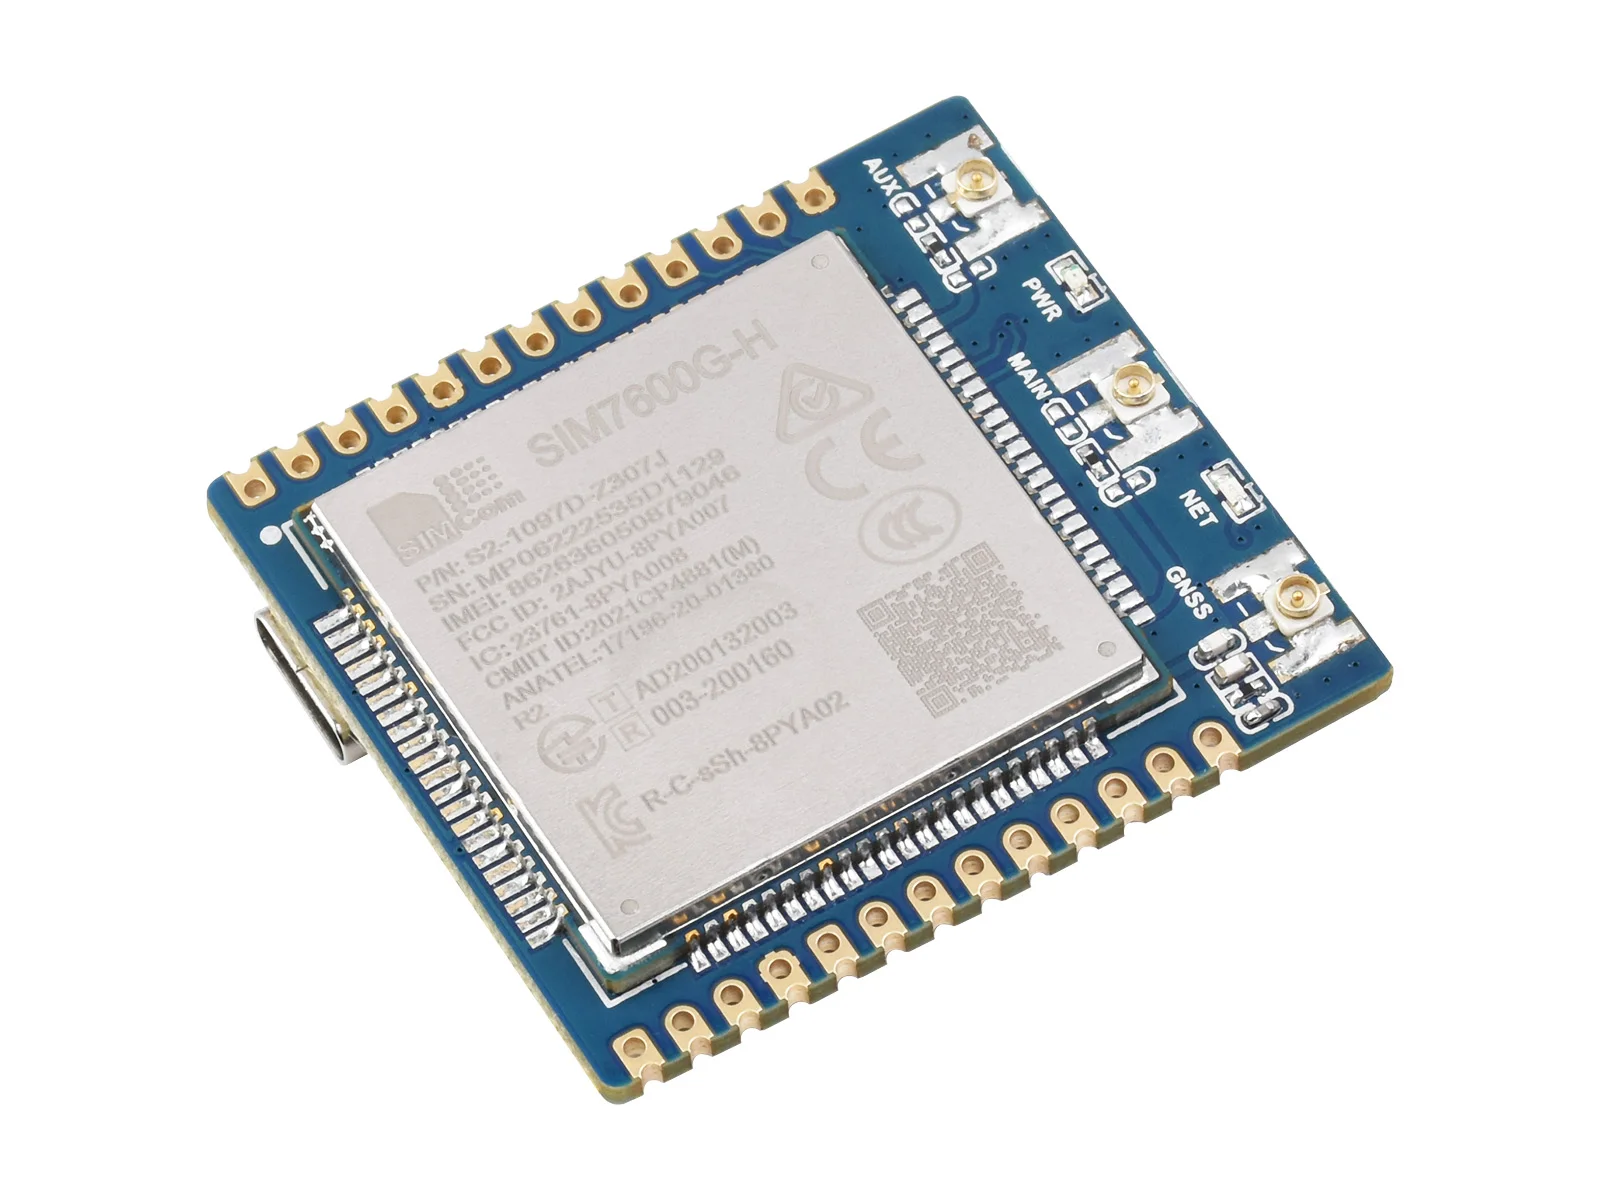 SIM7600X 4G Communication Module, Multi-band Support, Compatible with 4G/3G/2G, With GNSS Positioning, GPS/Beidou/GLONASS...